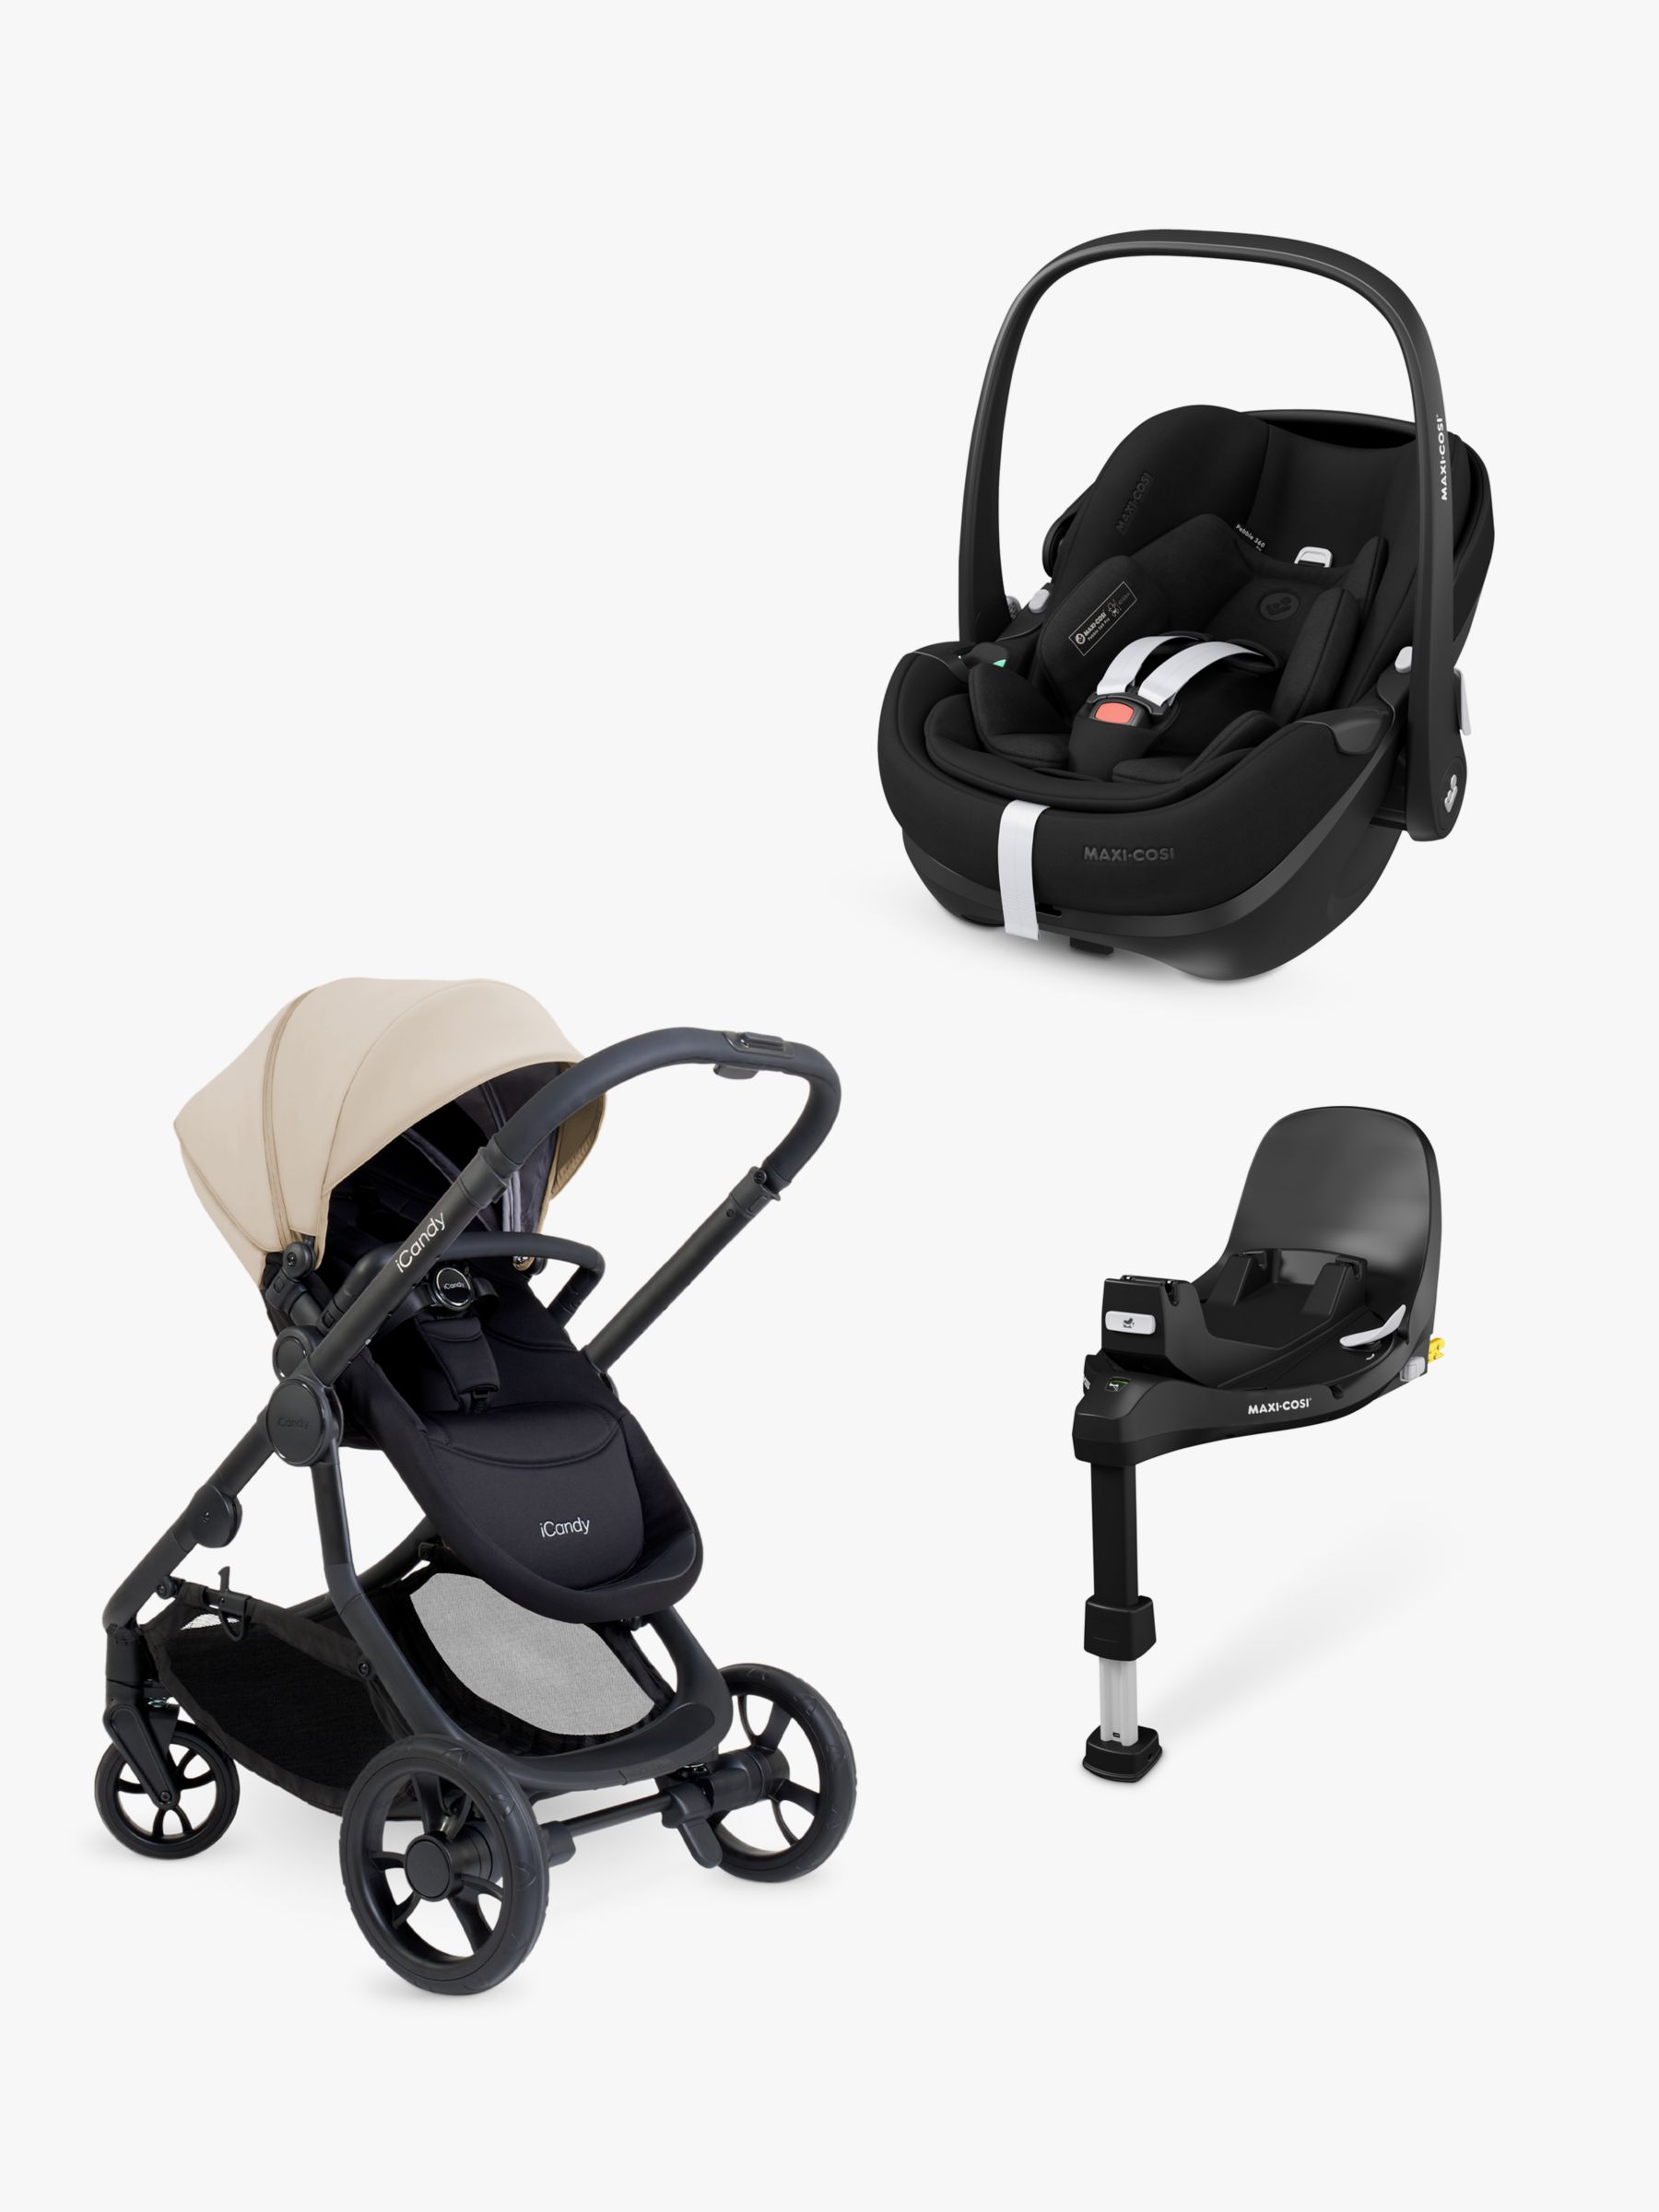 iCandy 4 Pushchair with Maxi-Cosi Pebble 3...